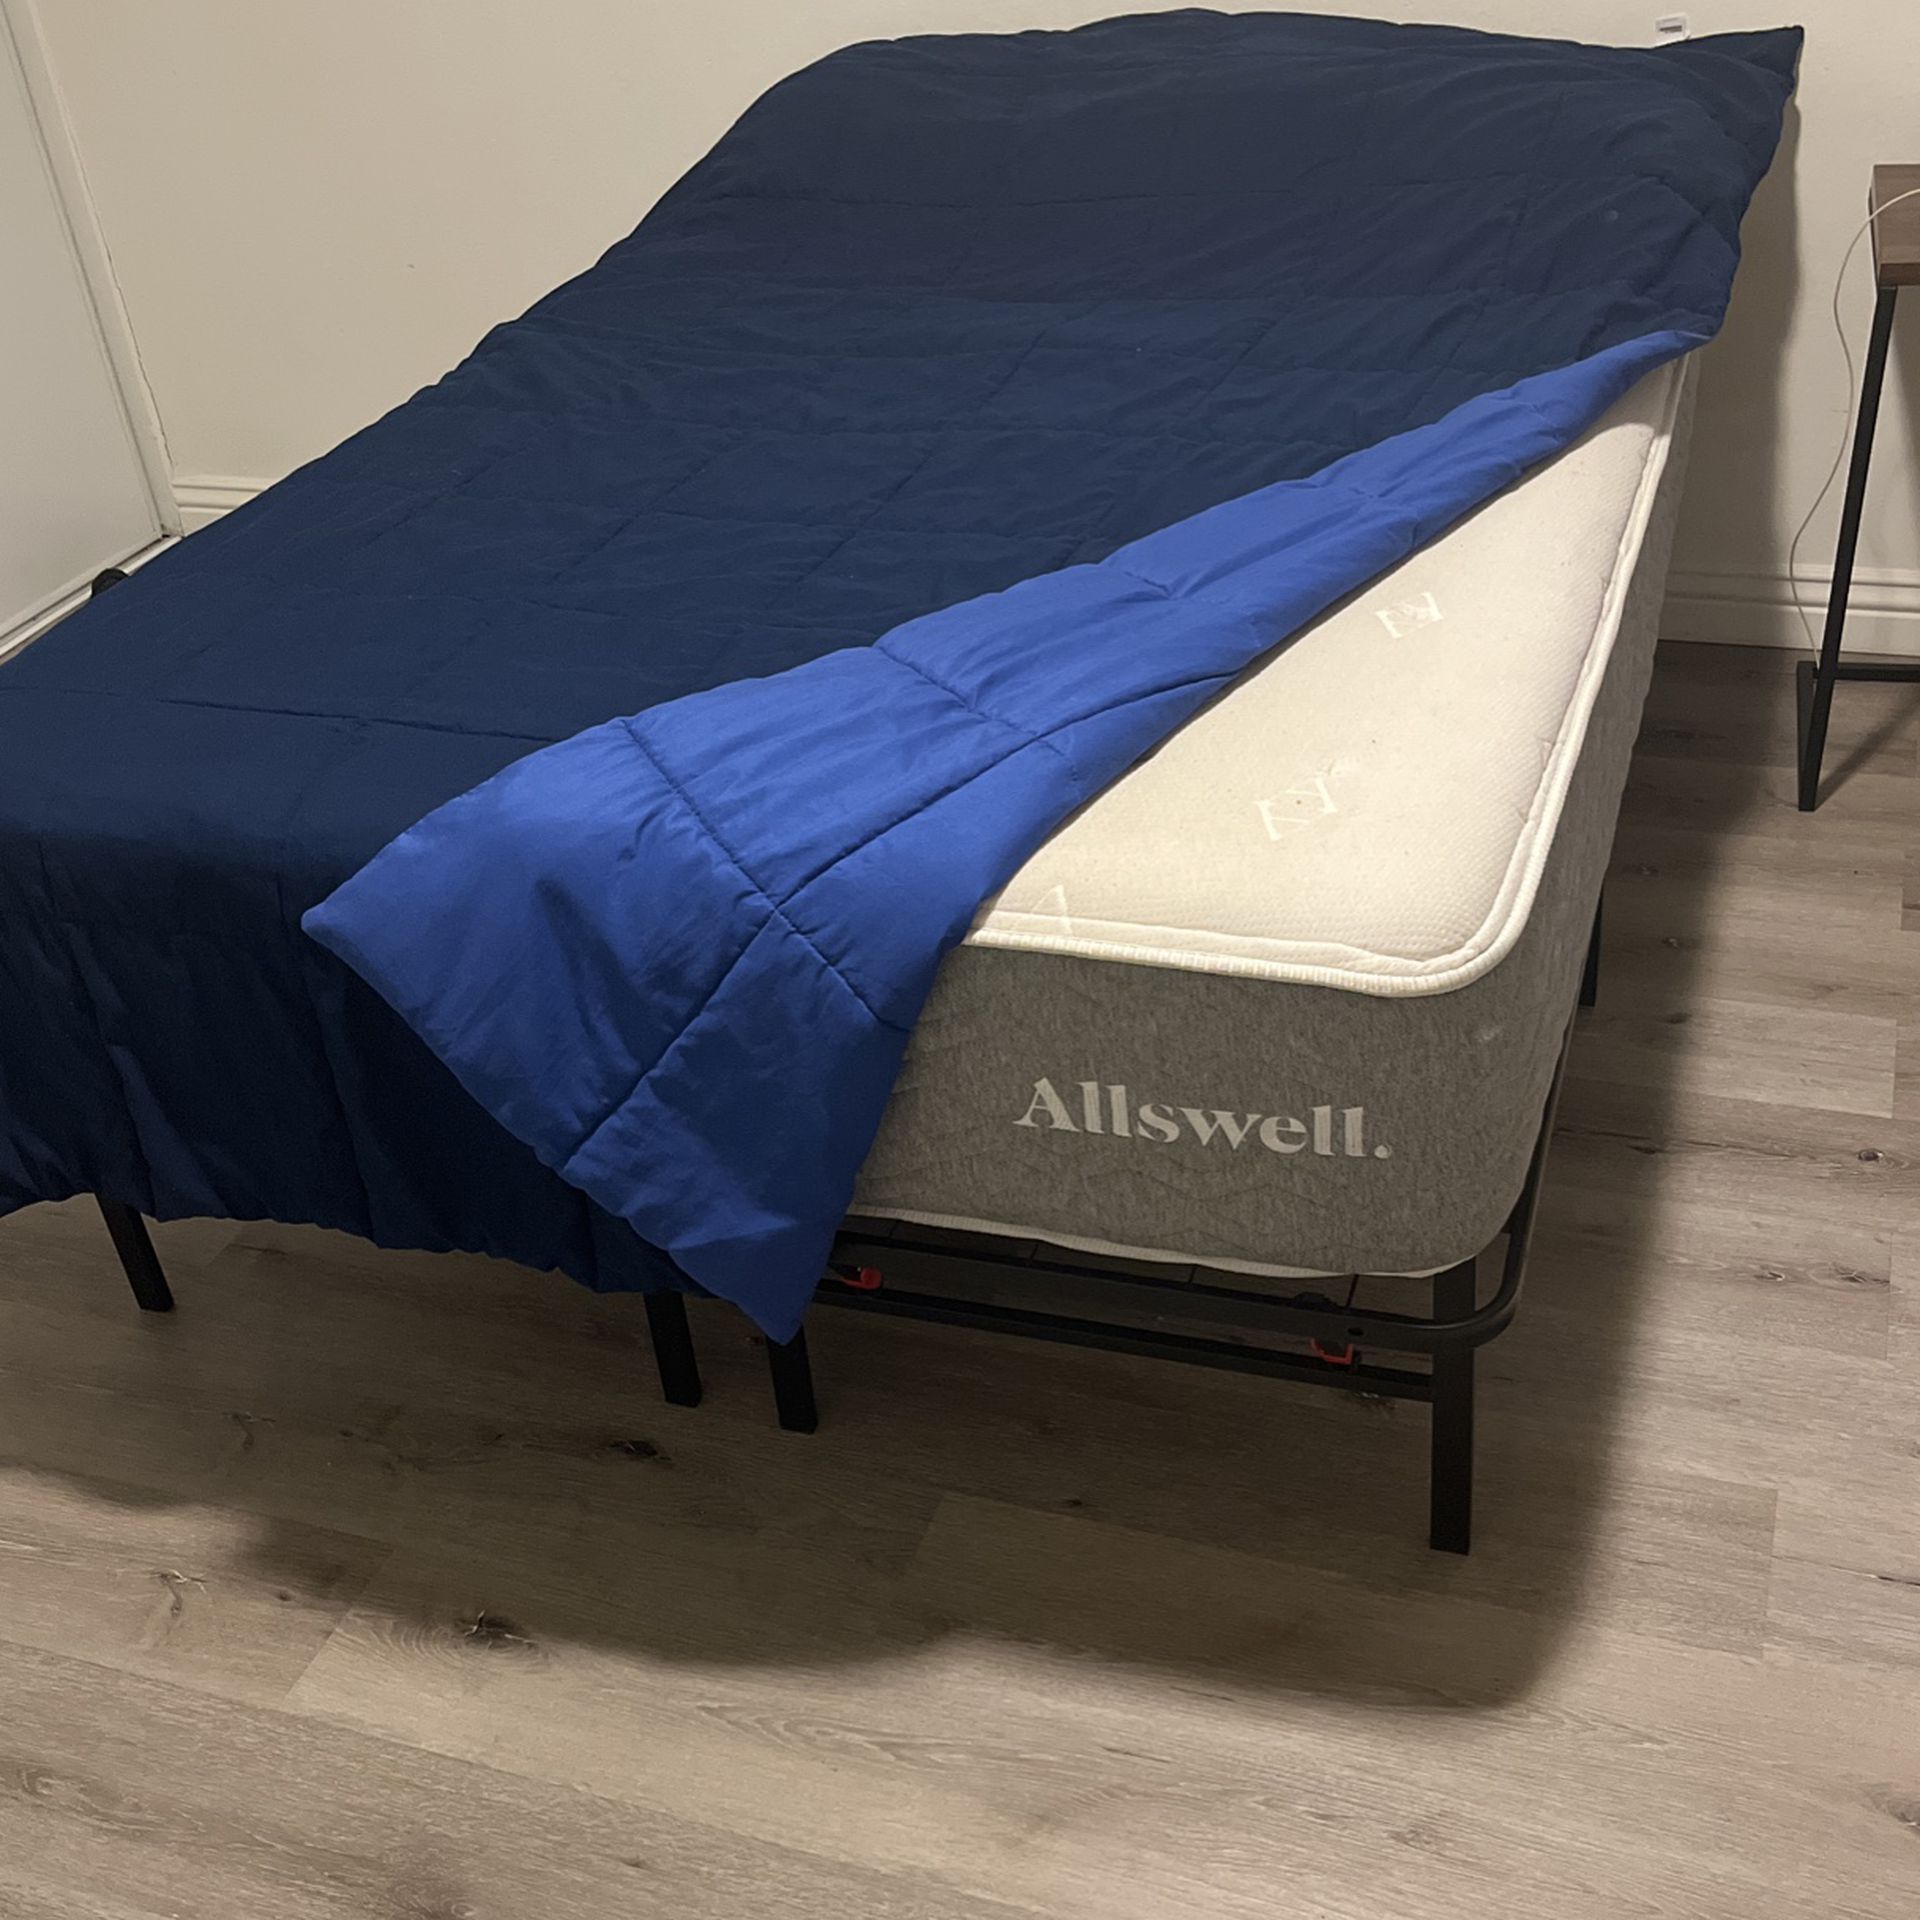 Allswell Bed, with frame, firmness 6